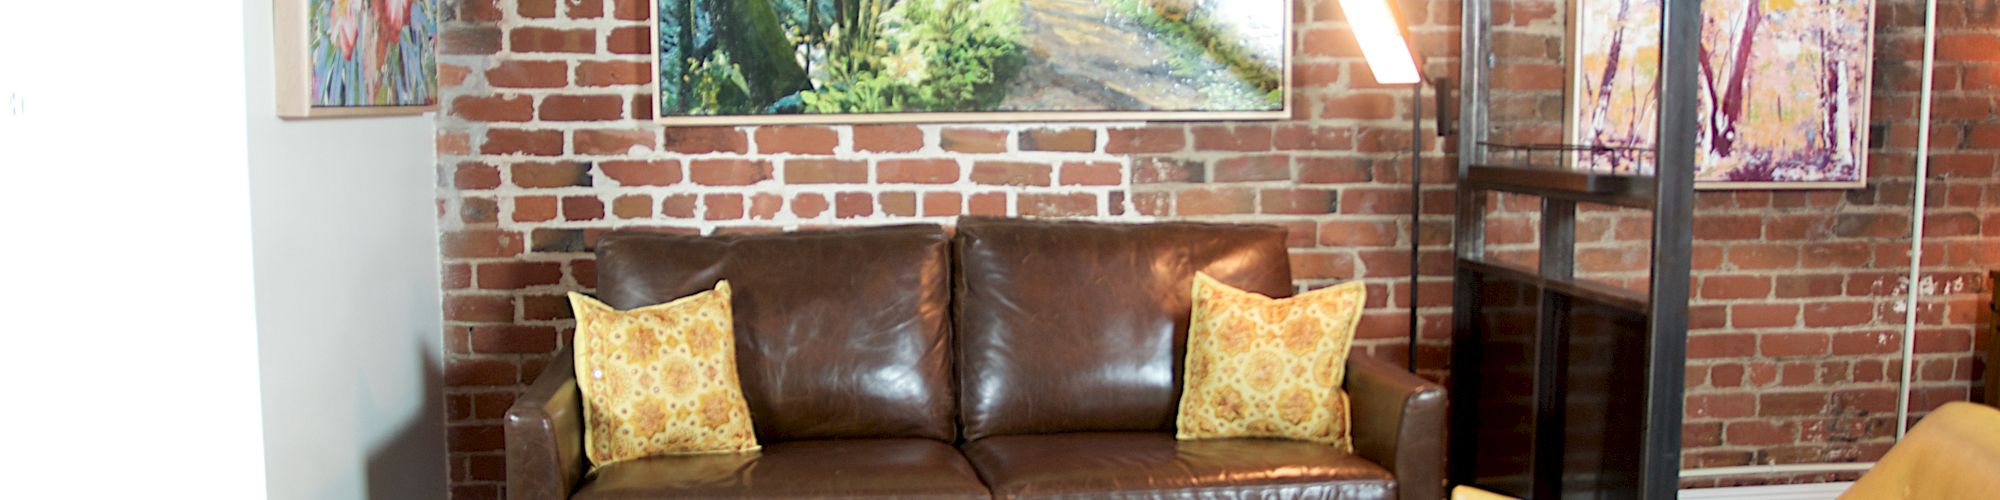 A cozy living room with a brown leather sofa, two yellow chairs, a coffee table, and nature-themed wall art on exposed brick walls.